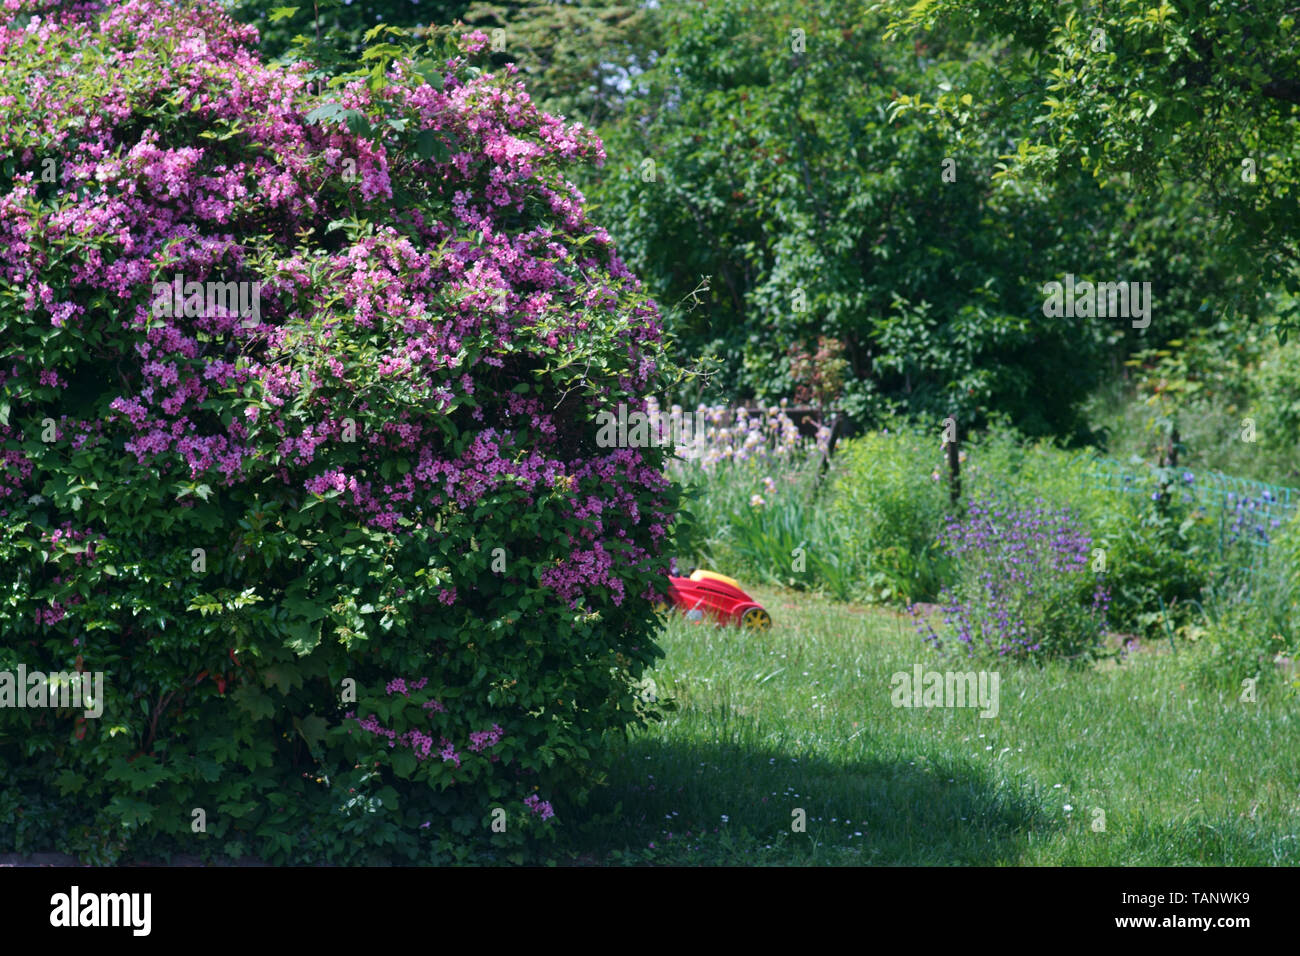 A lawnmower cuts the lawn of a garden behind flowering shrubs. Stock Photo